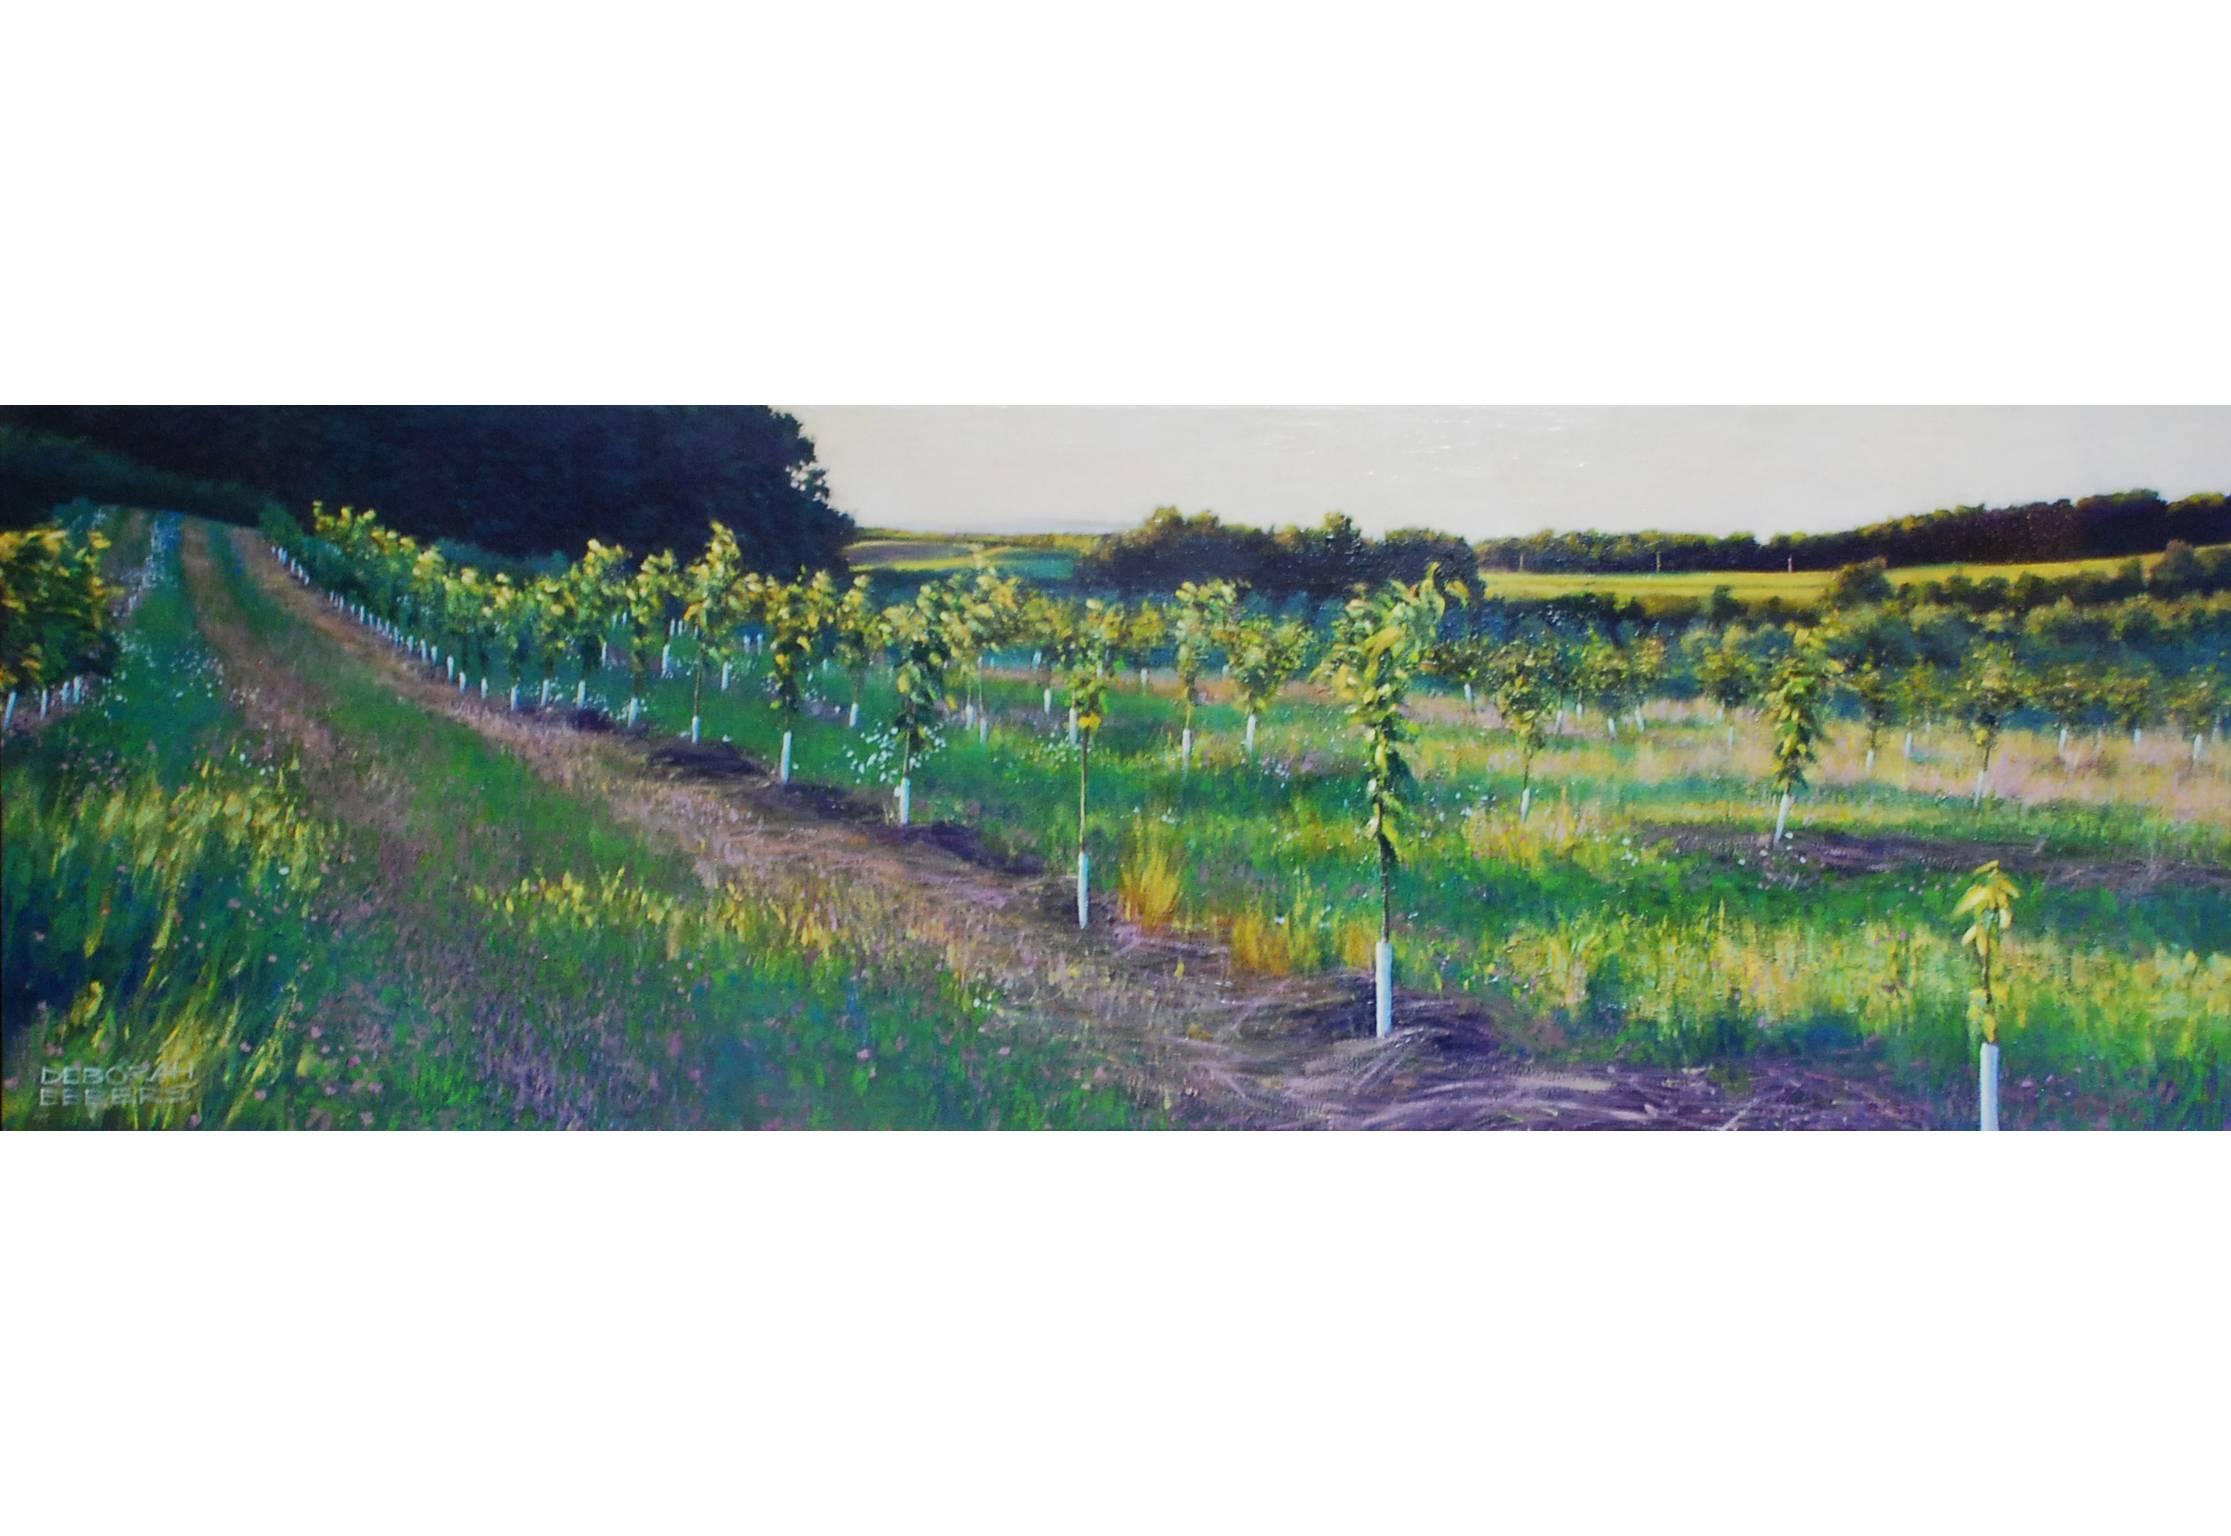 Deborah Ebbers Landscape Painting – Orchard Path - Original Oil Painting of Orchard and Hills Bathed in Spring Light